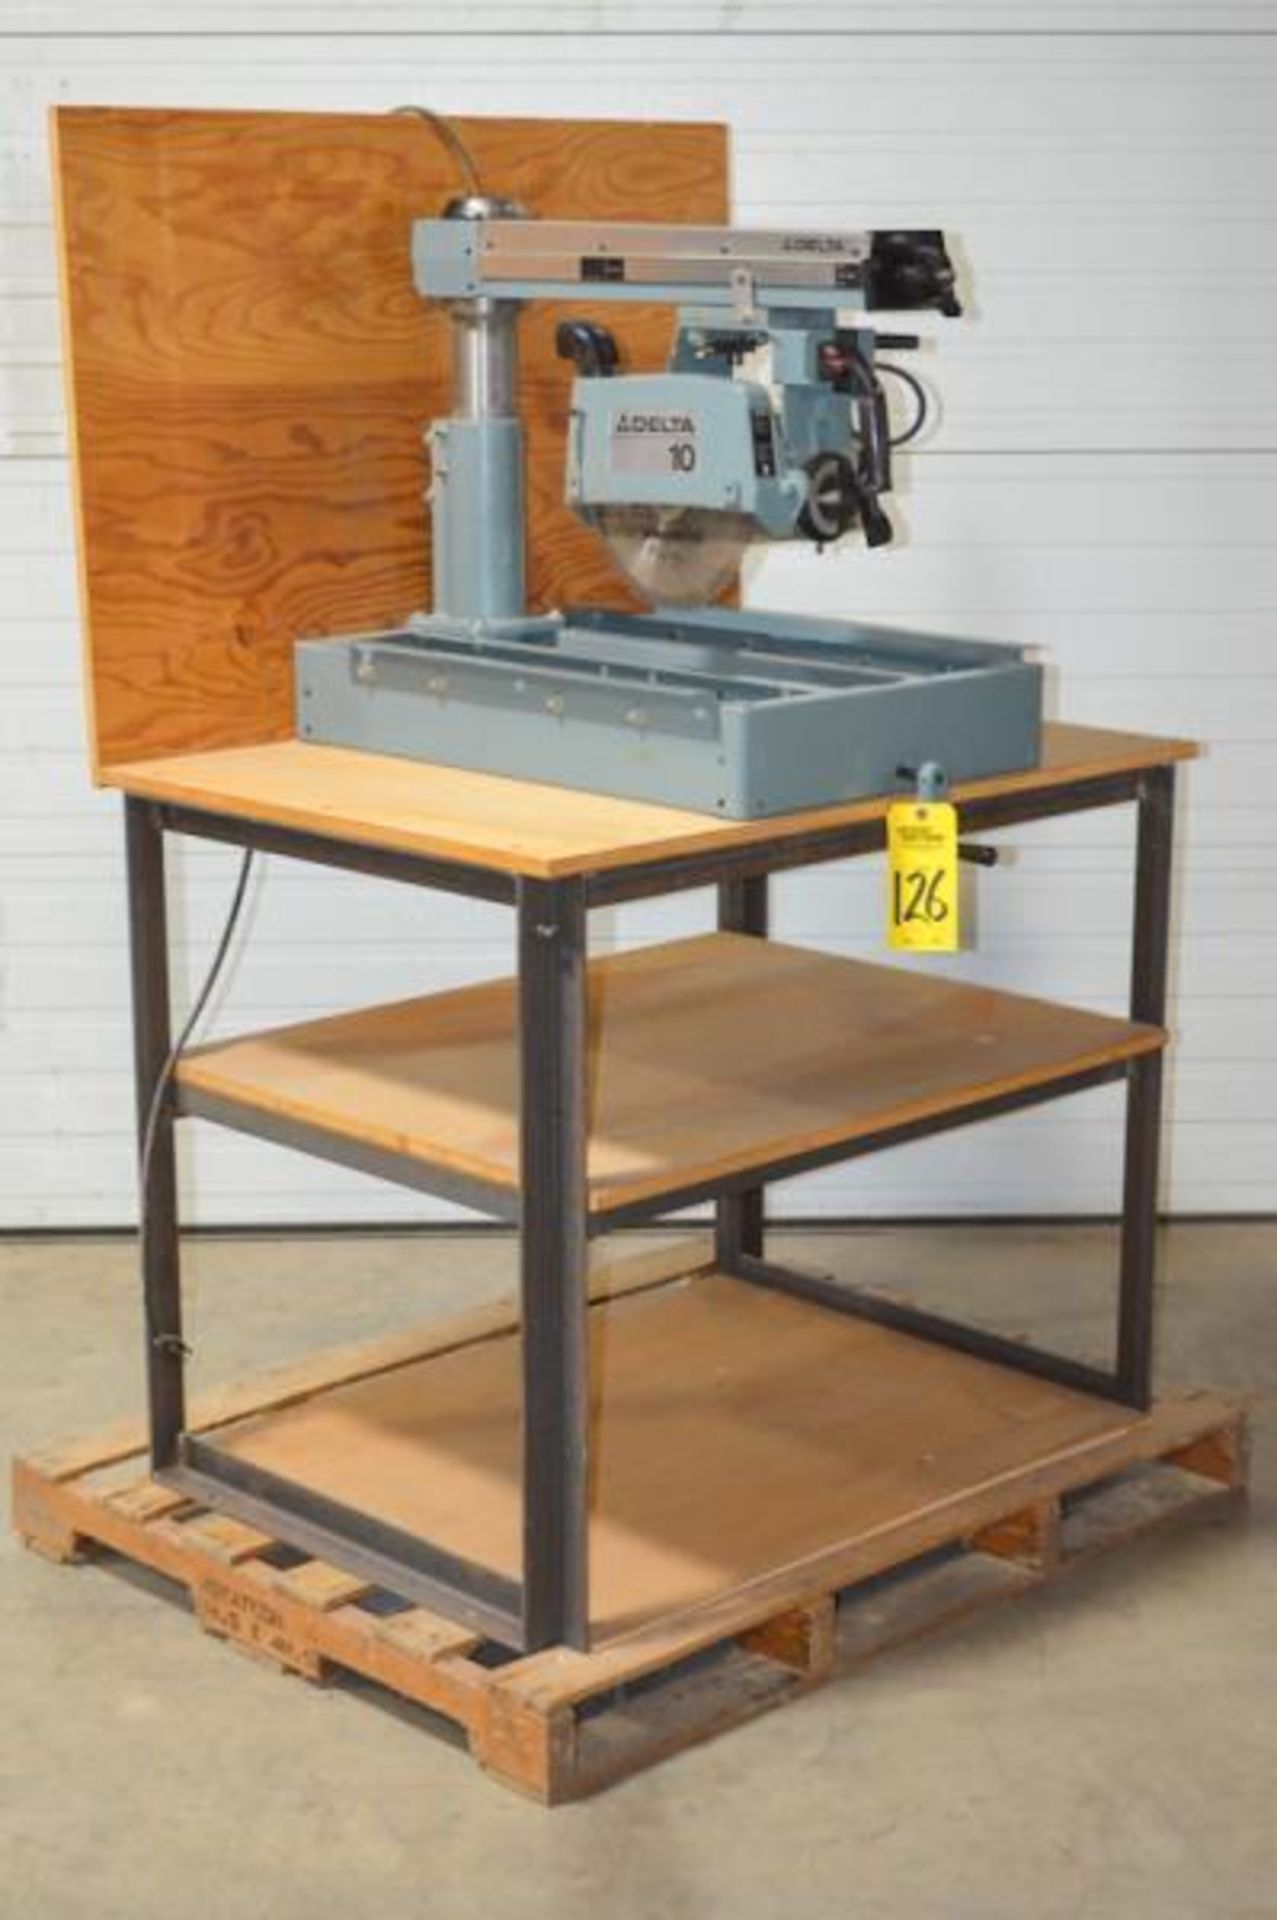 DELTA 10 10” RADIAL ARM SAW, BLADE SIZE 20” X 30” X 4.75”H, RIP CAP. 0-14” IN / 12” – 24” OUT, BLADE - Image 2 of 8